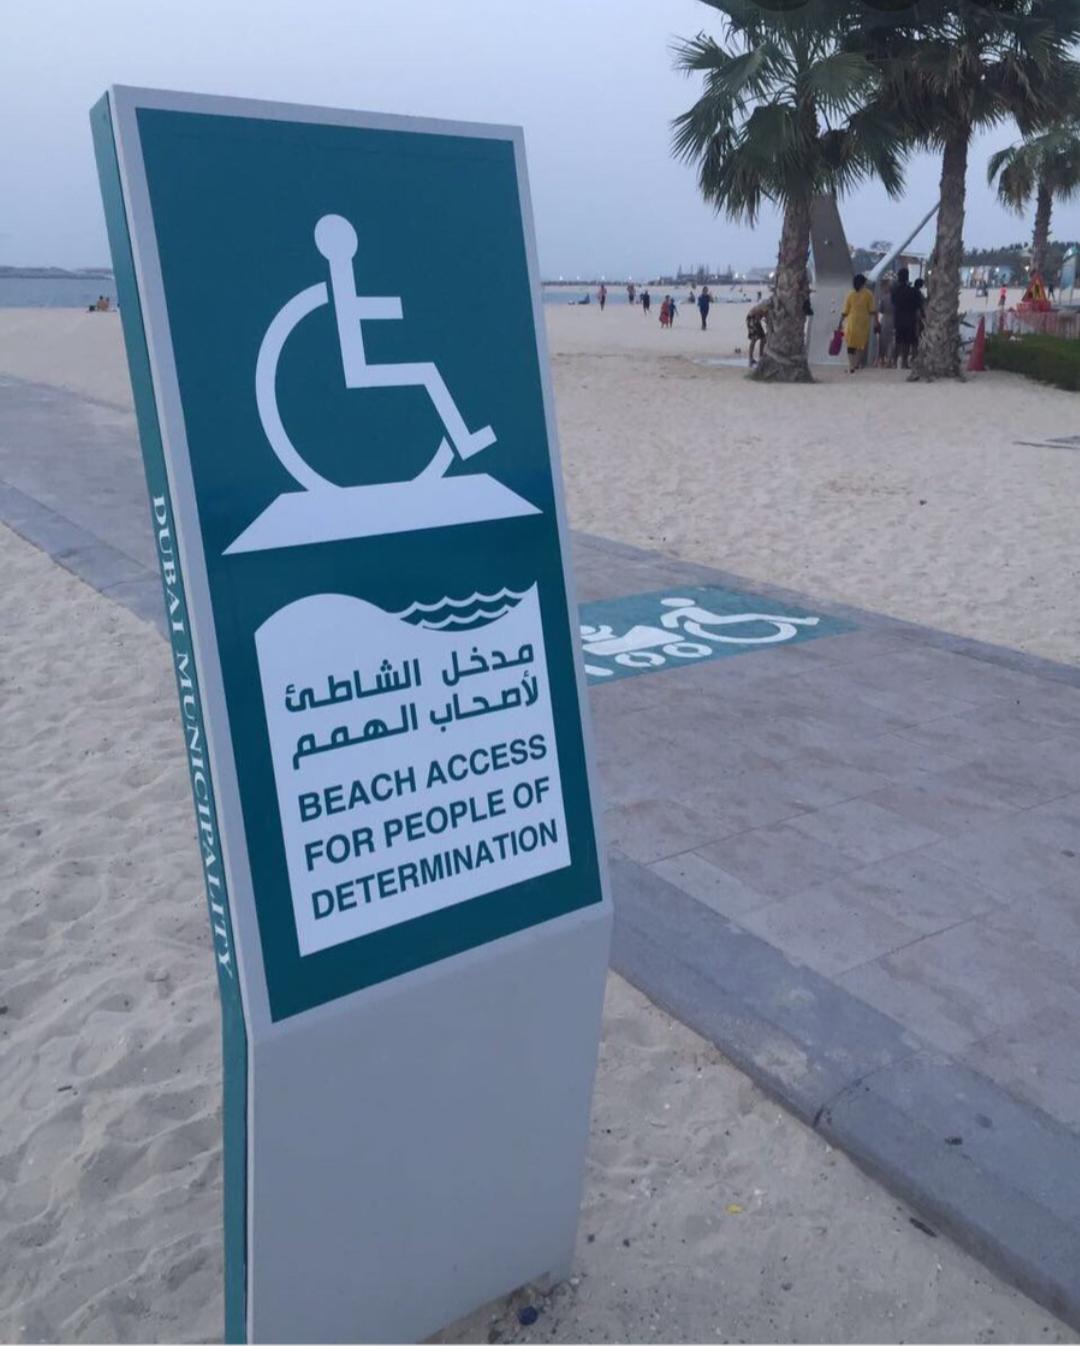 Disabled+people+are+called+People+Of+Determination+in+the+Saudi+Arabia.